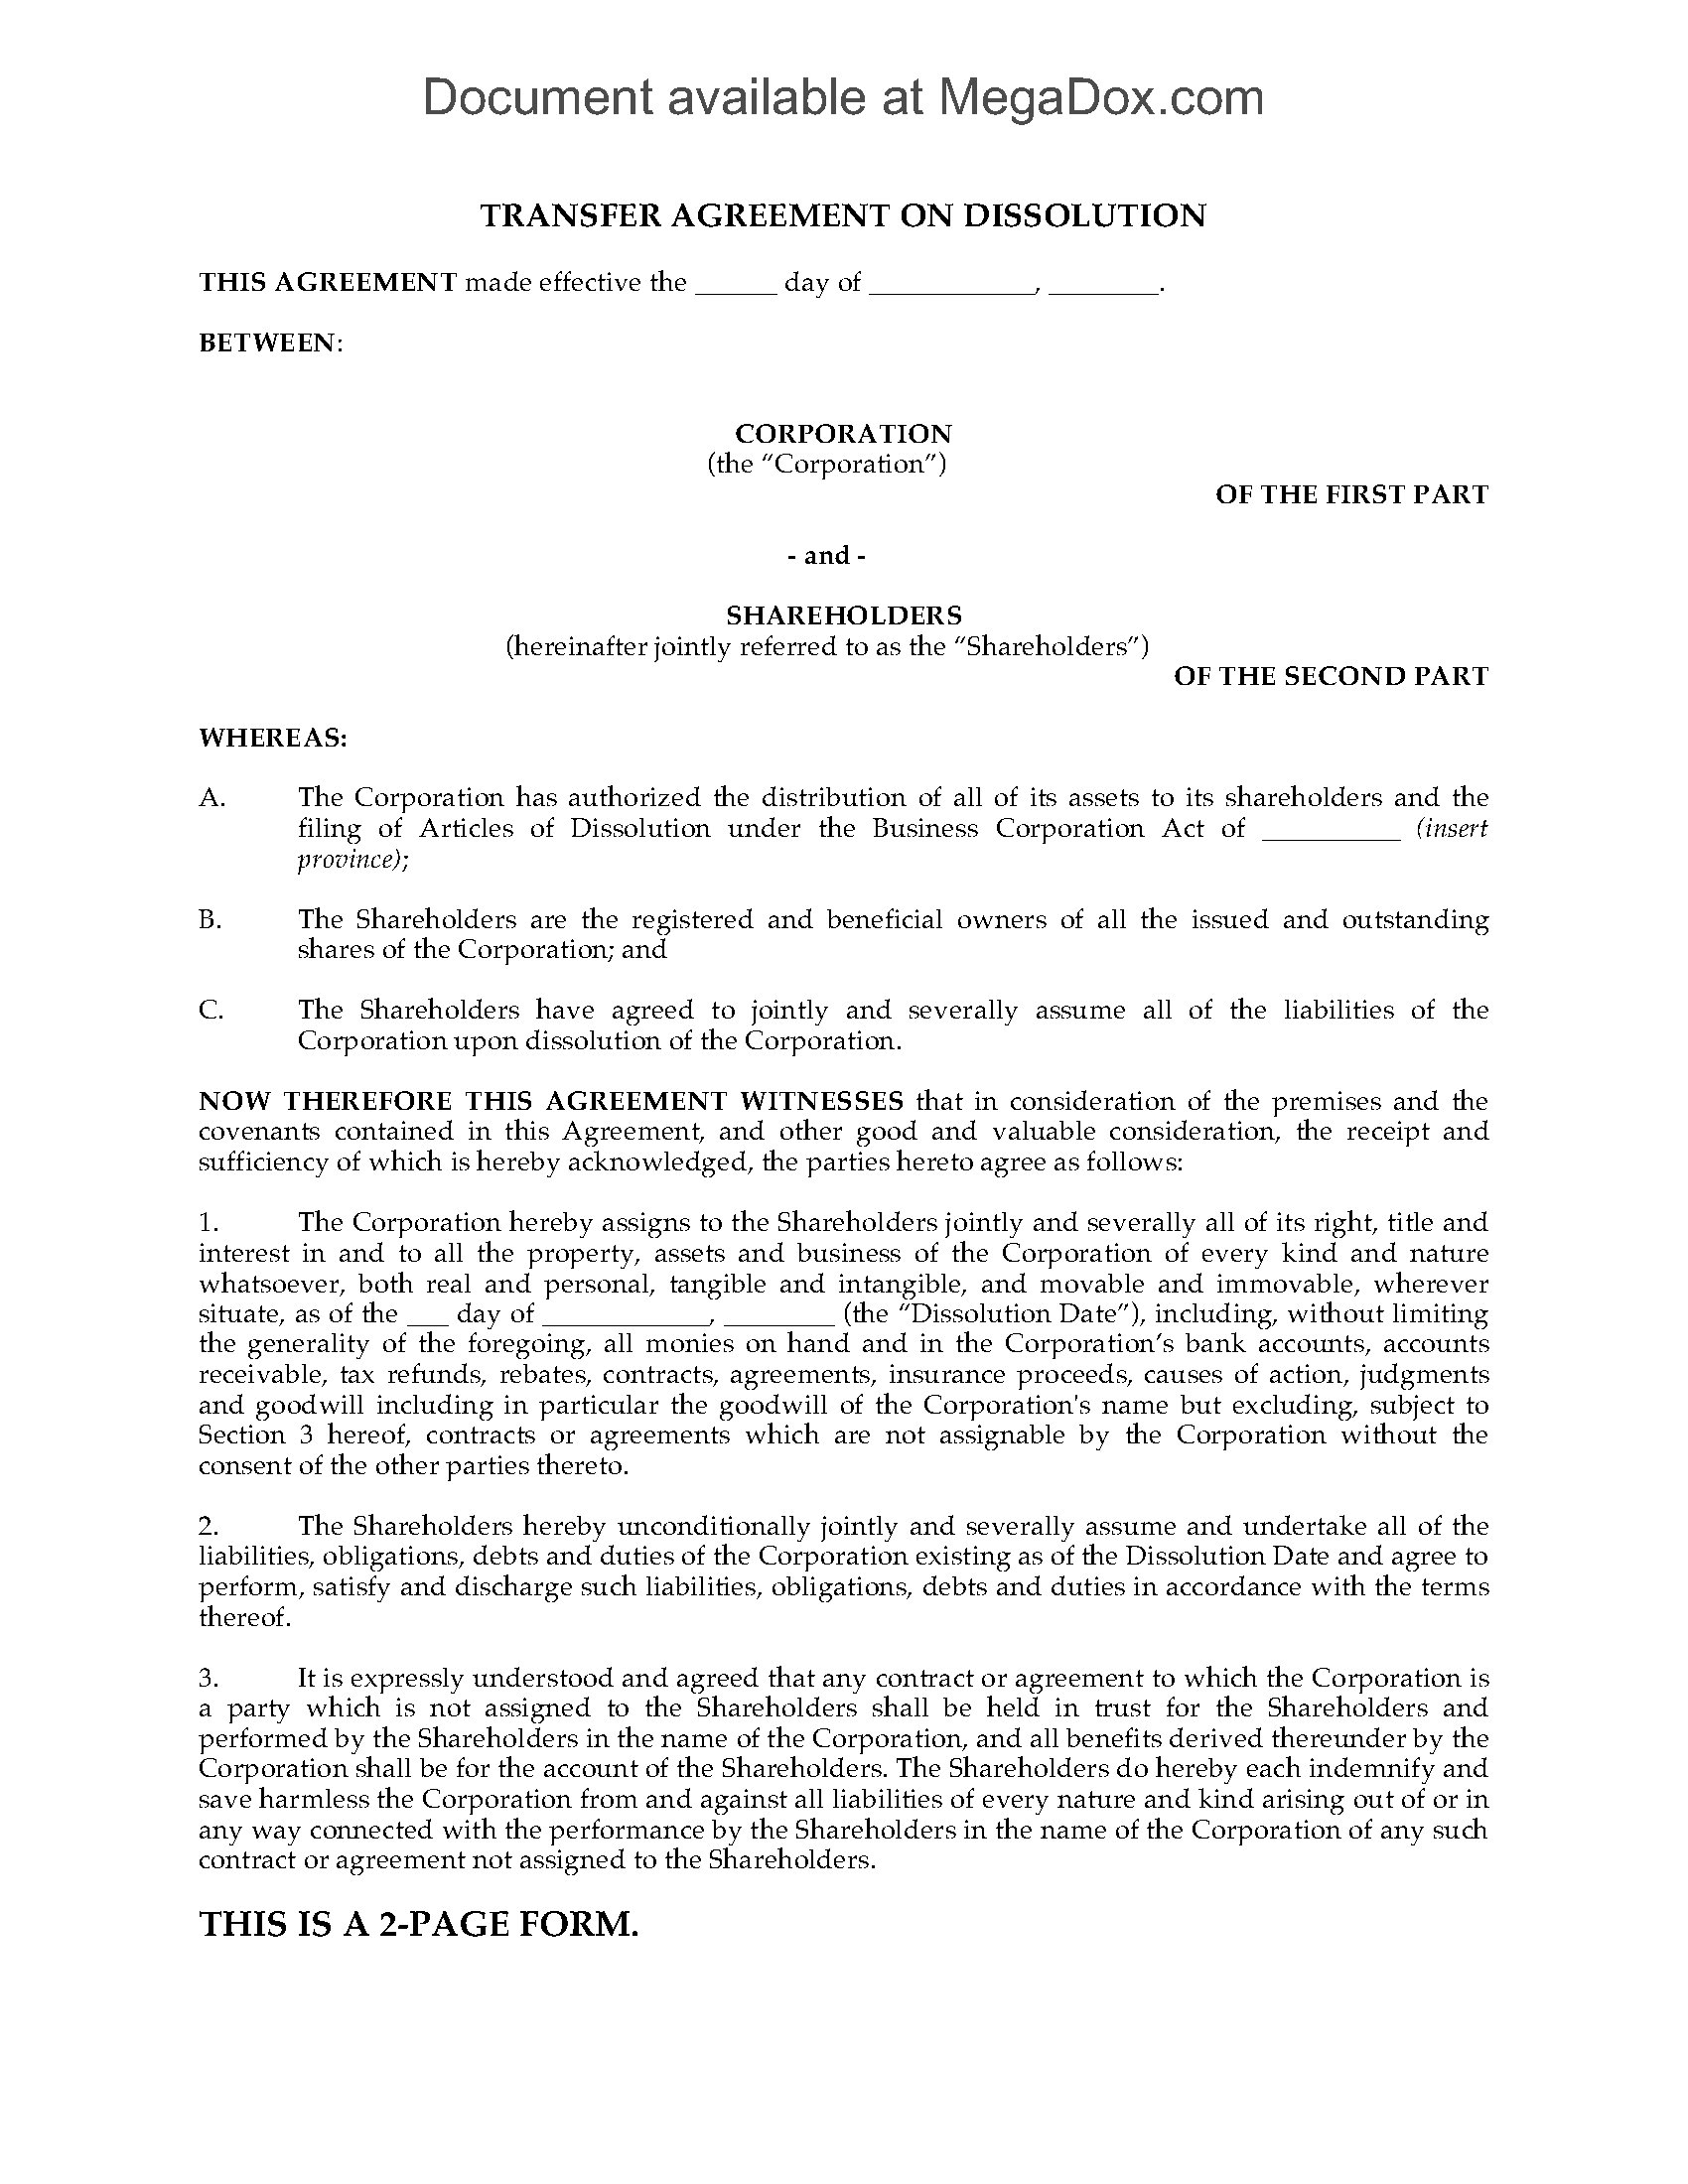 Business Transfer Agreement Canada Transfer Agreement On Dissolution